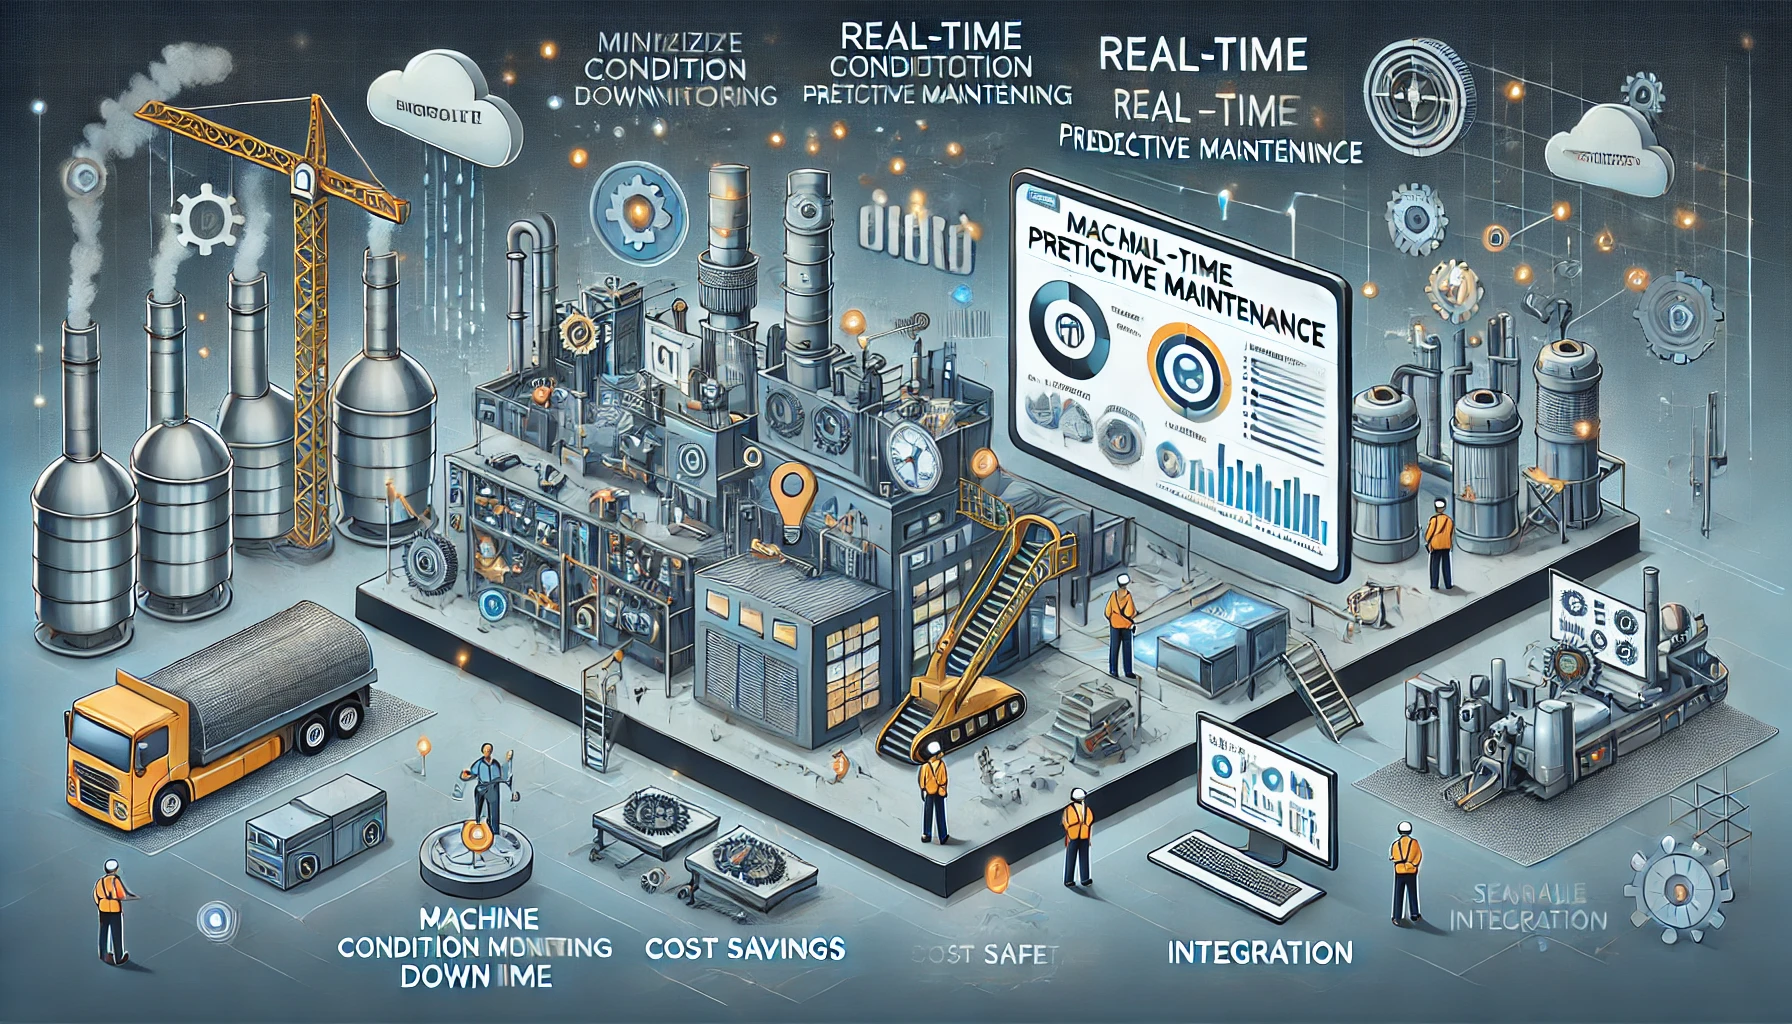 How Machine Condition Monitoring Supports Real-Time Predictive Maintenance